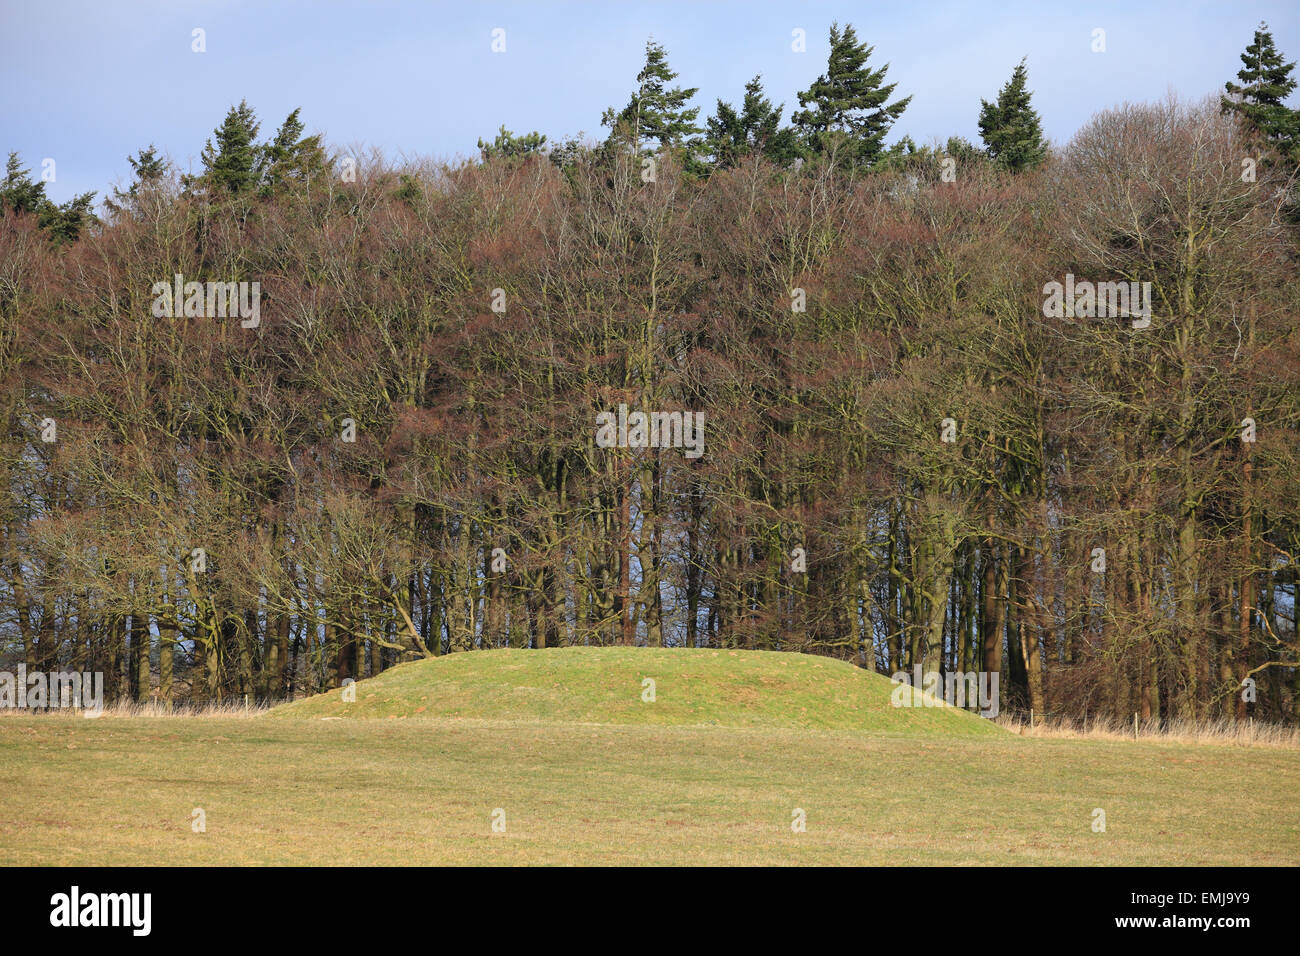 Bronze age burial mound near Anmer in Norfolk, UK. Stock Photo